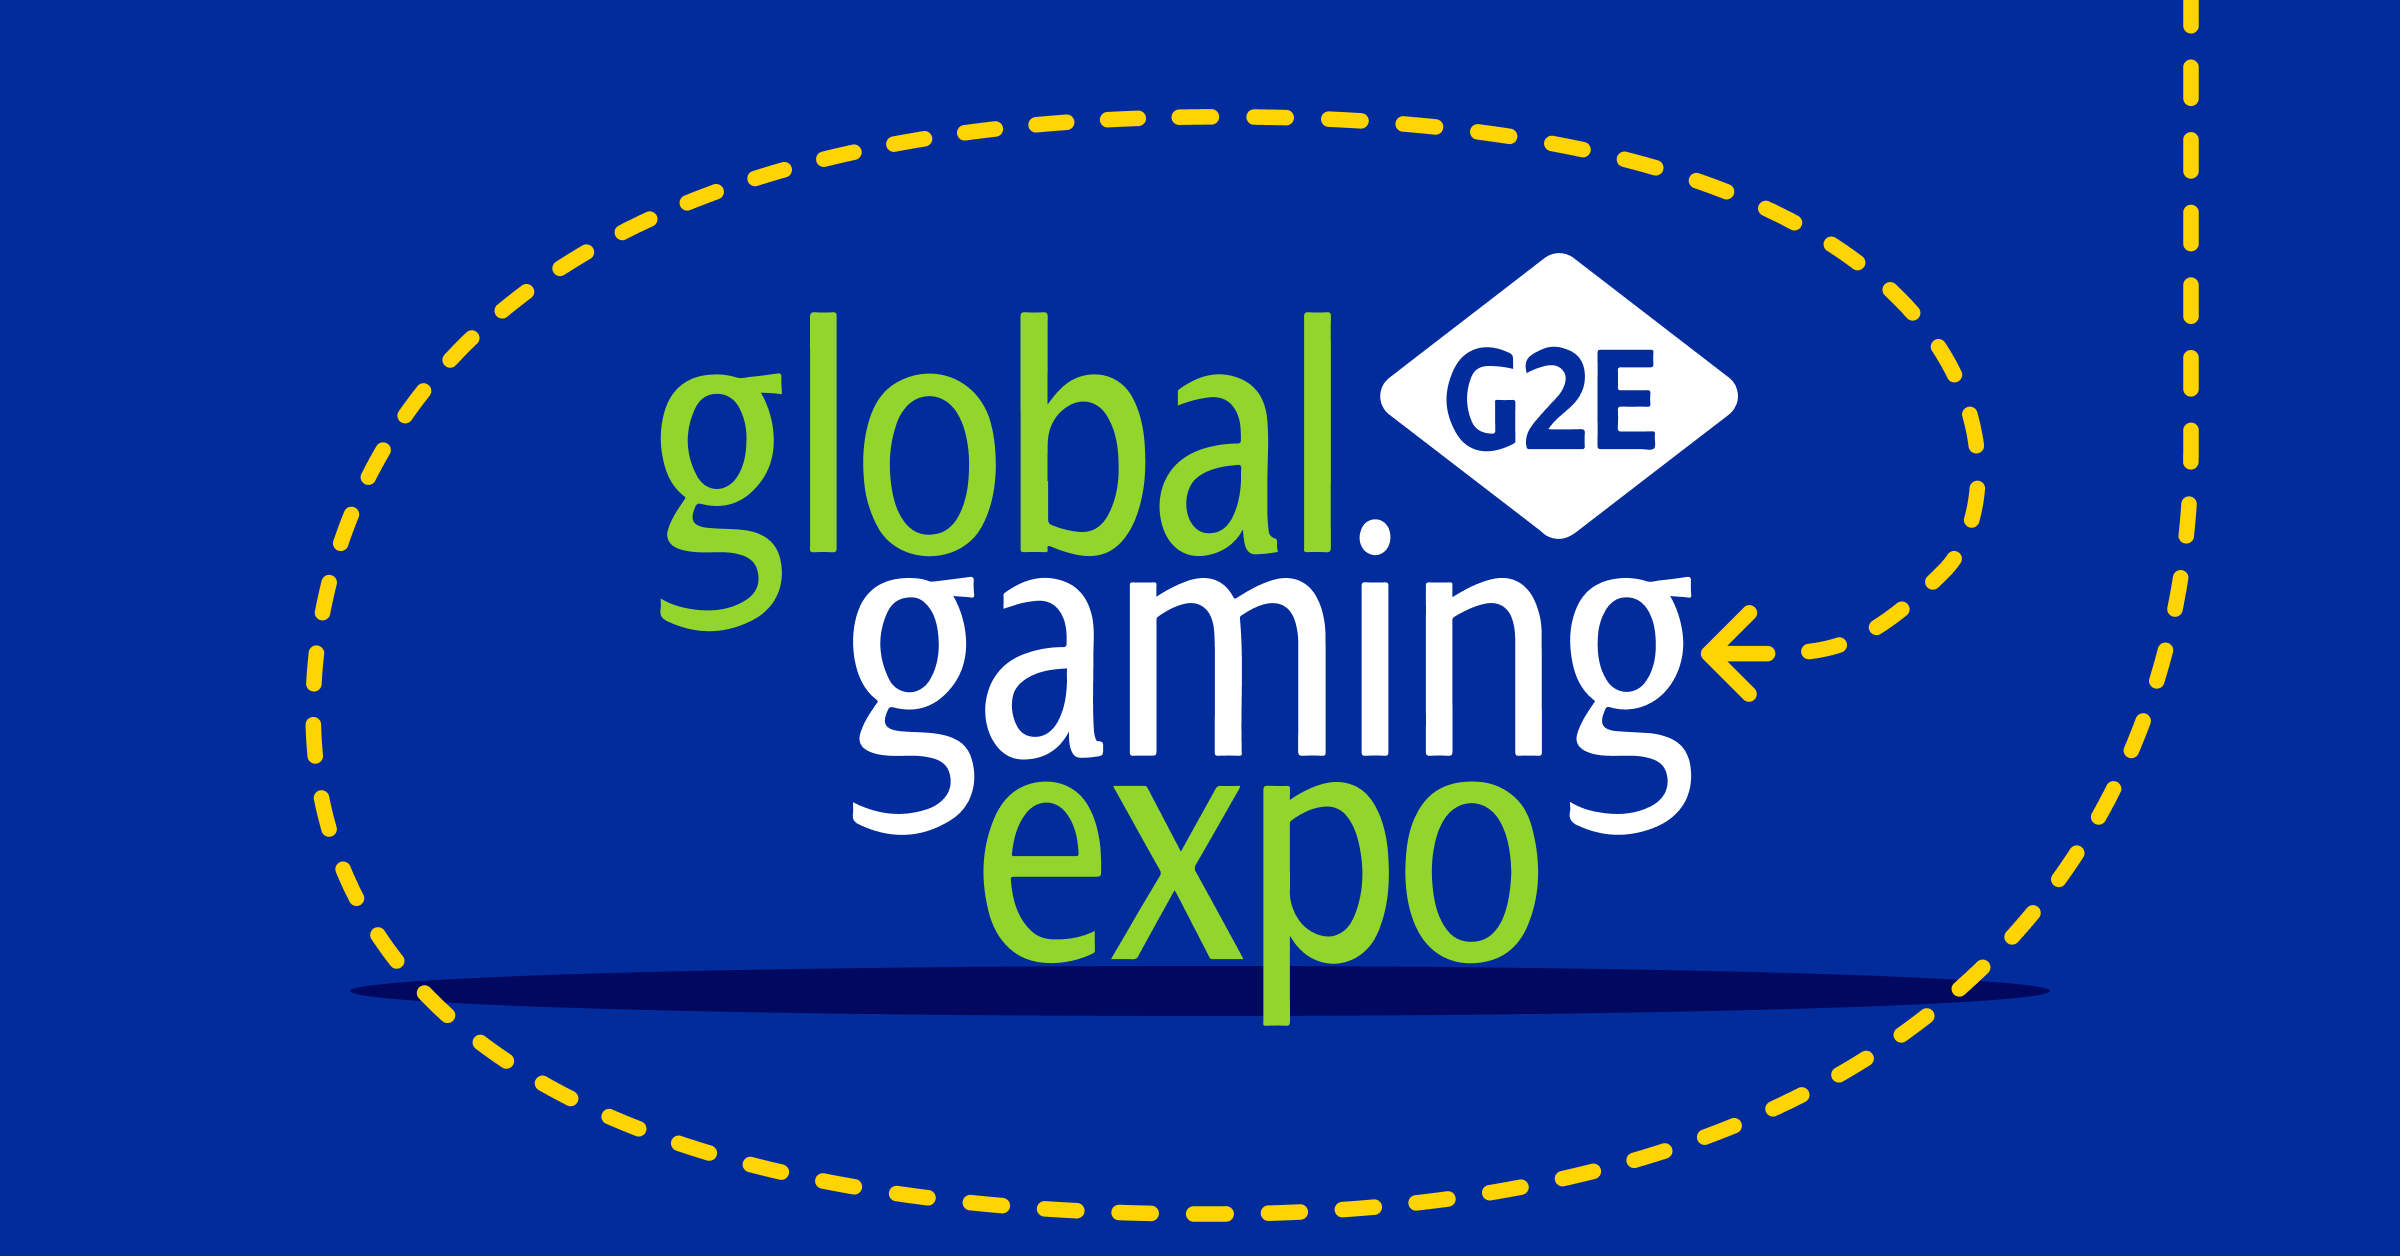 Meet us at the Canadian Networking room at Global Gaming Expo 2020